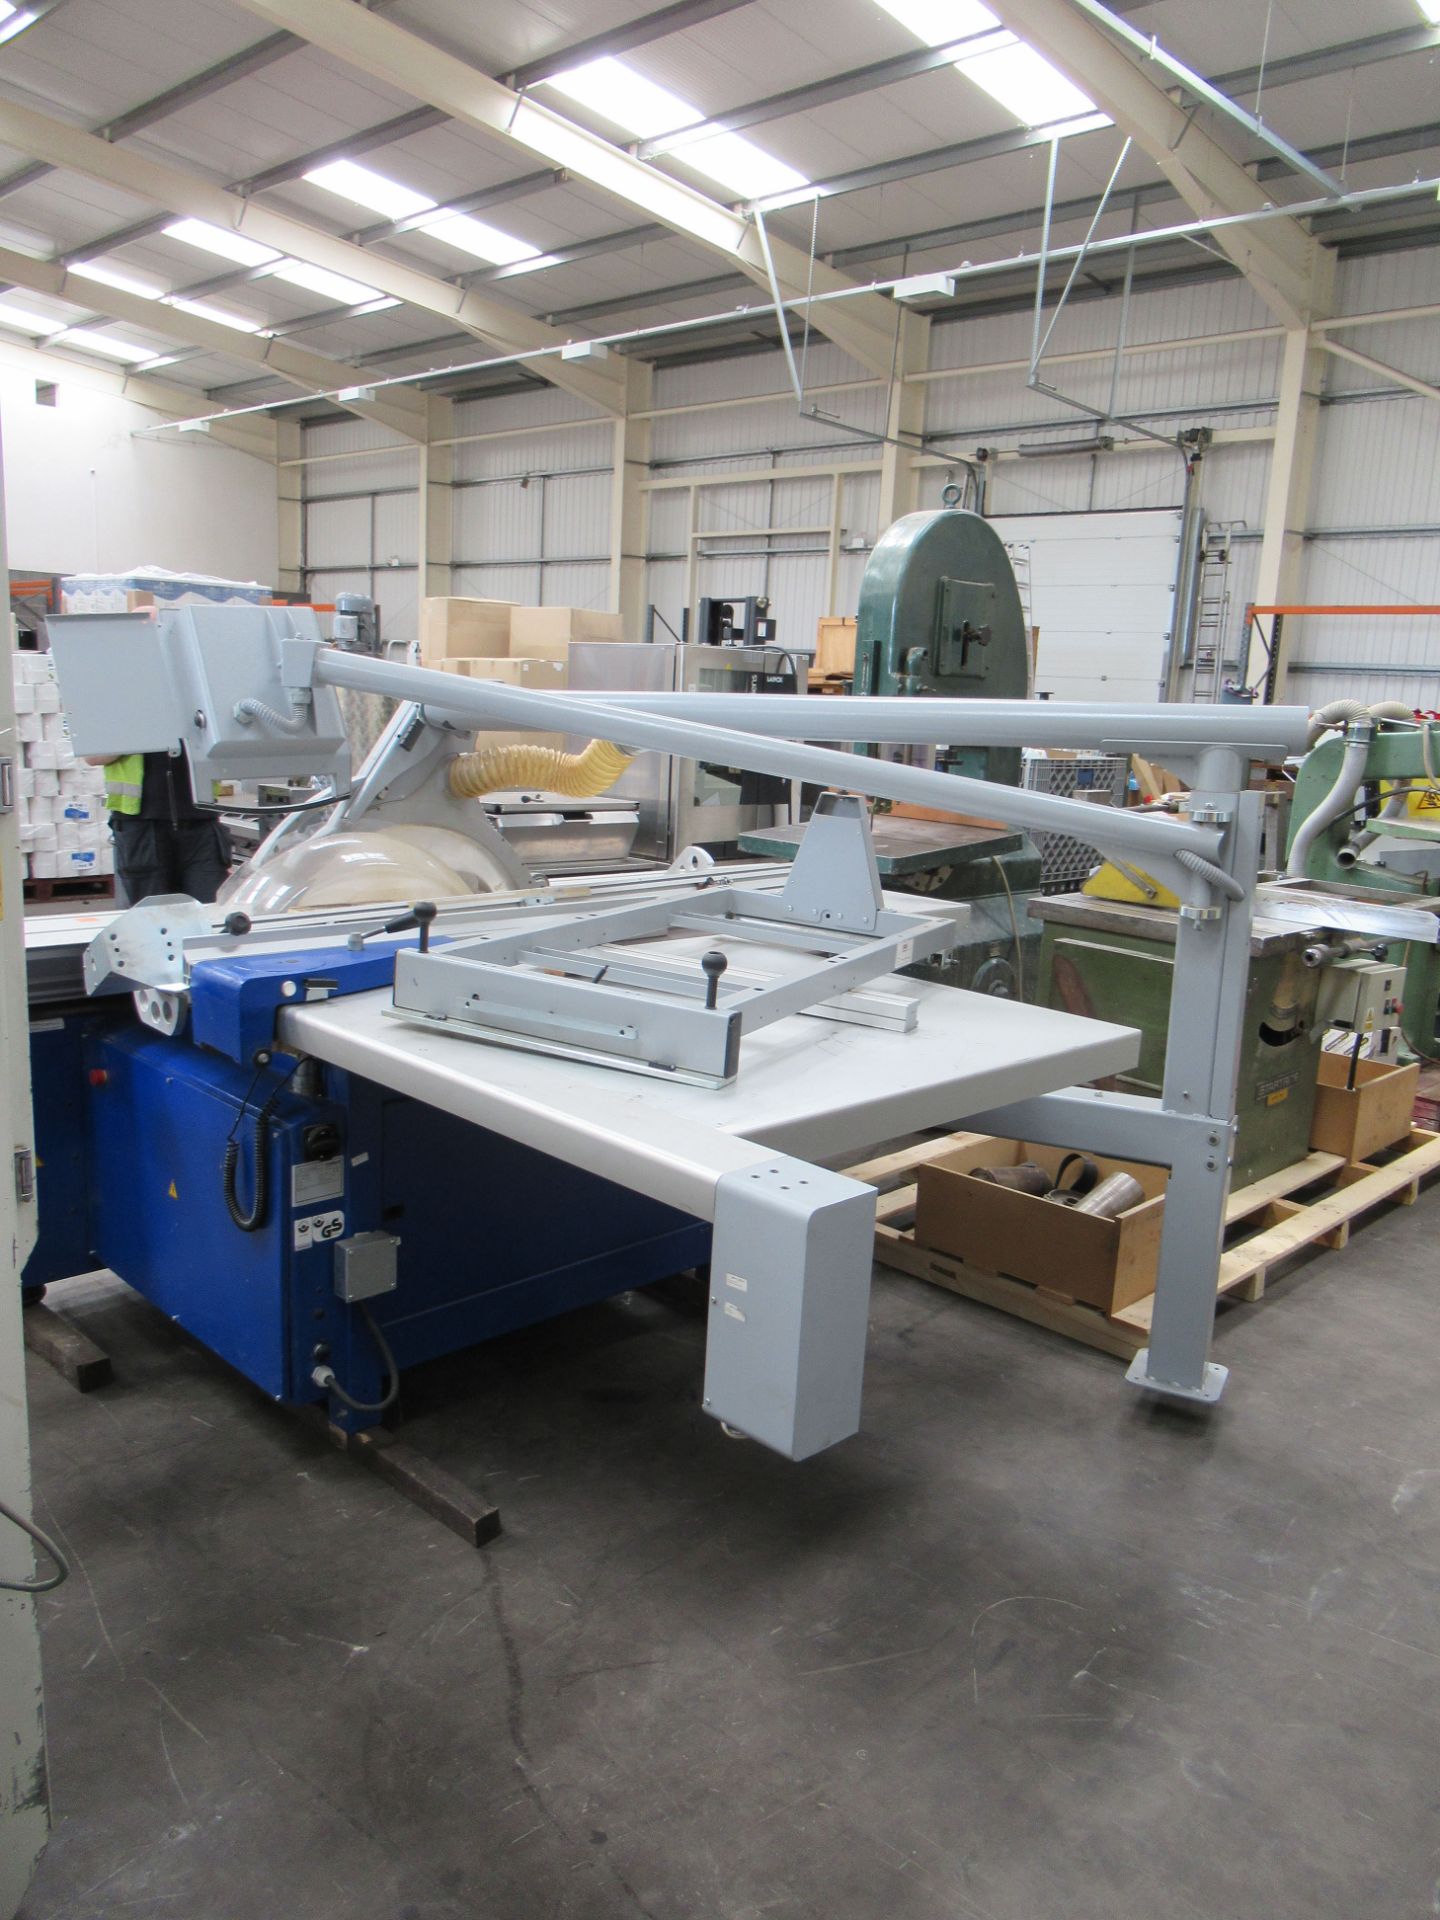 Format4 Kappa 550 Sliding Panel Saw and Attachments - Image 6 of 7